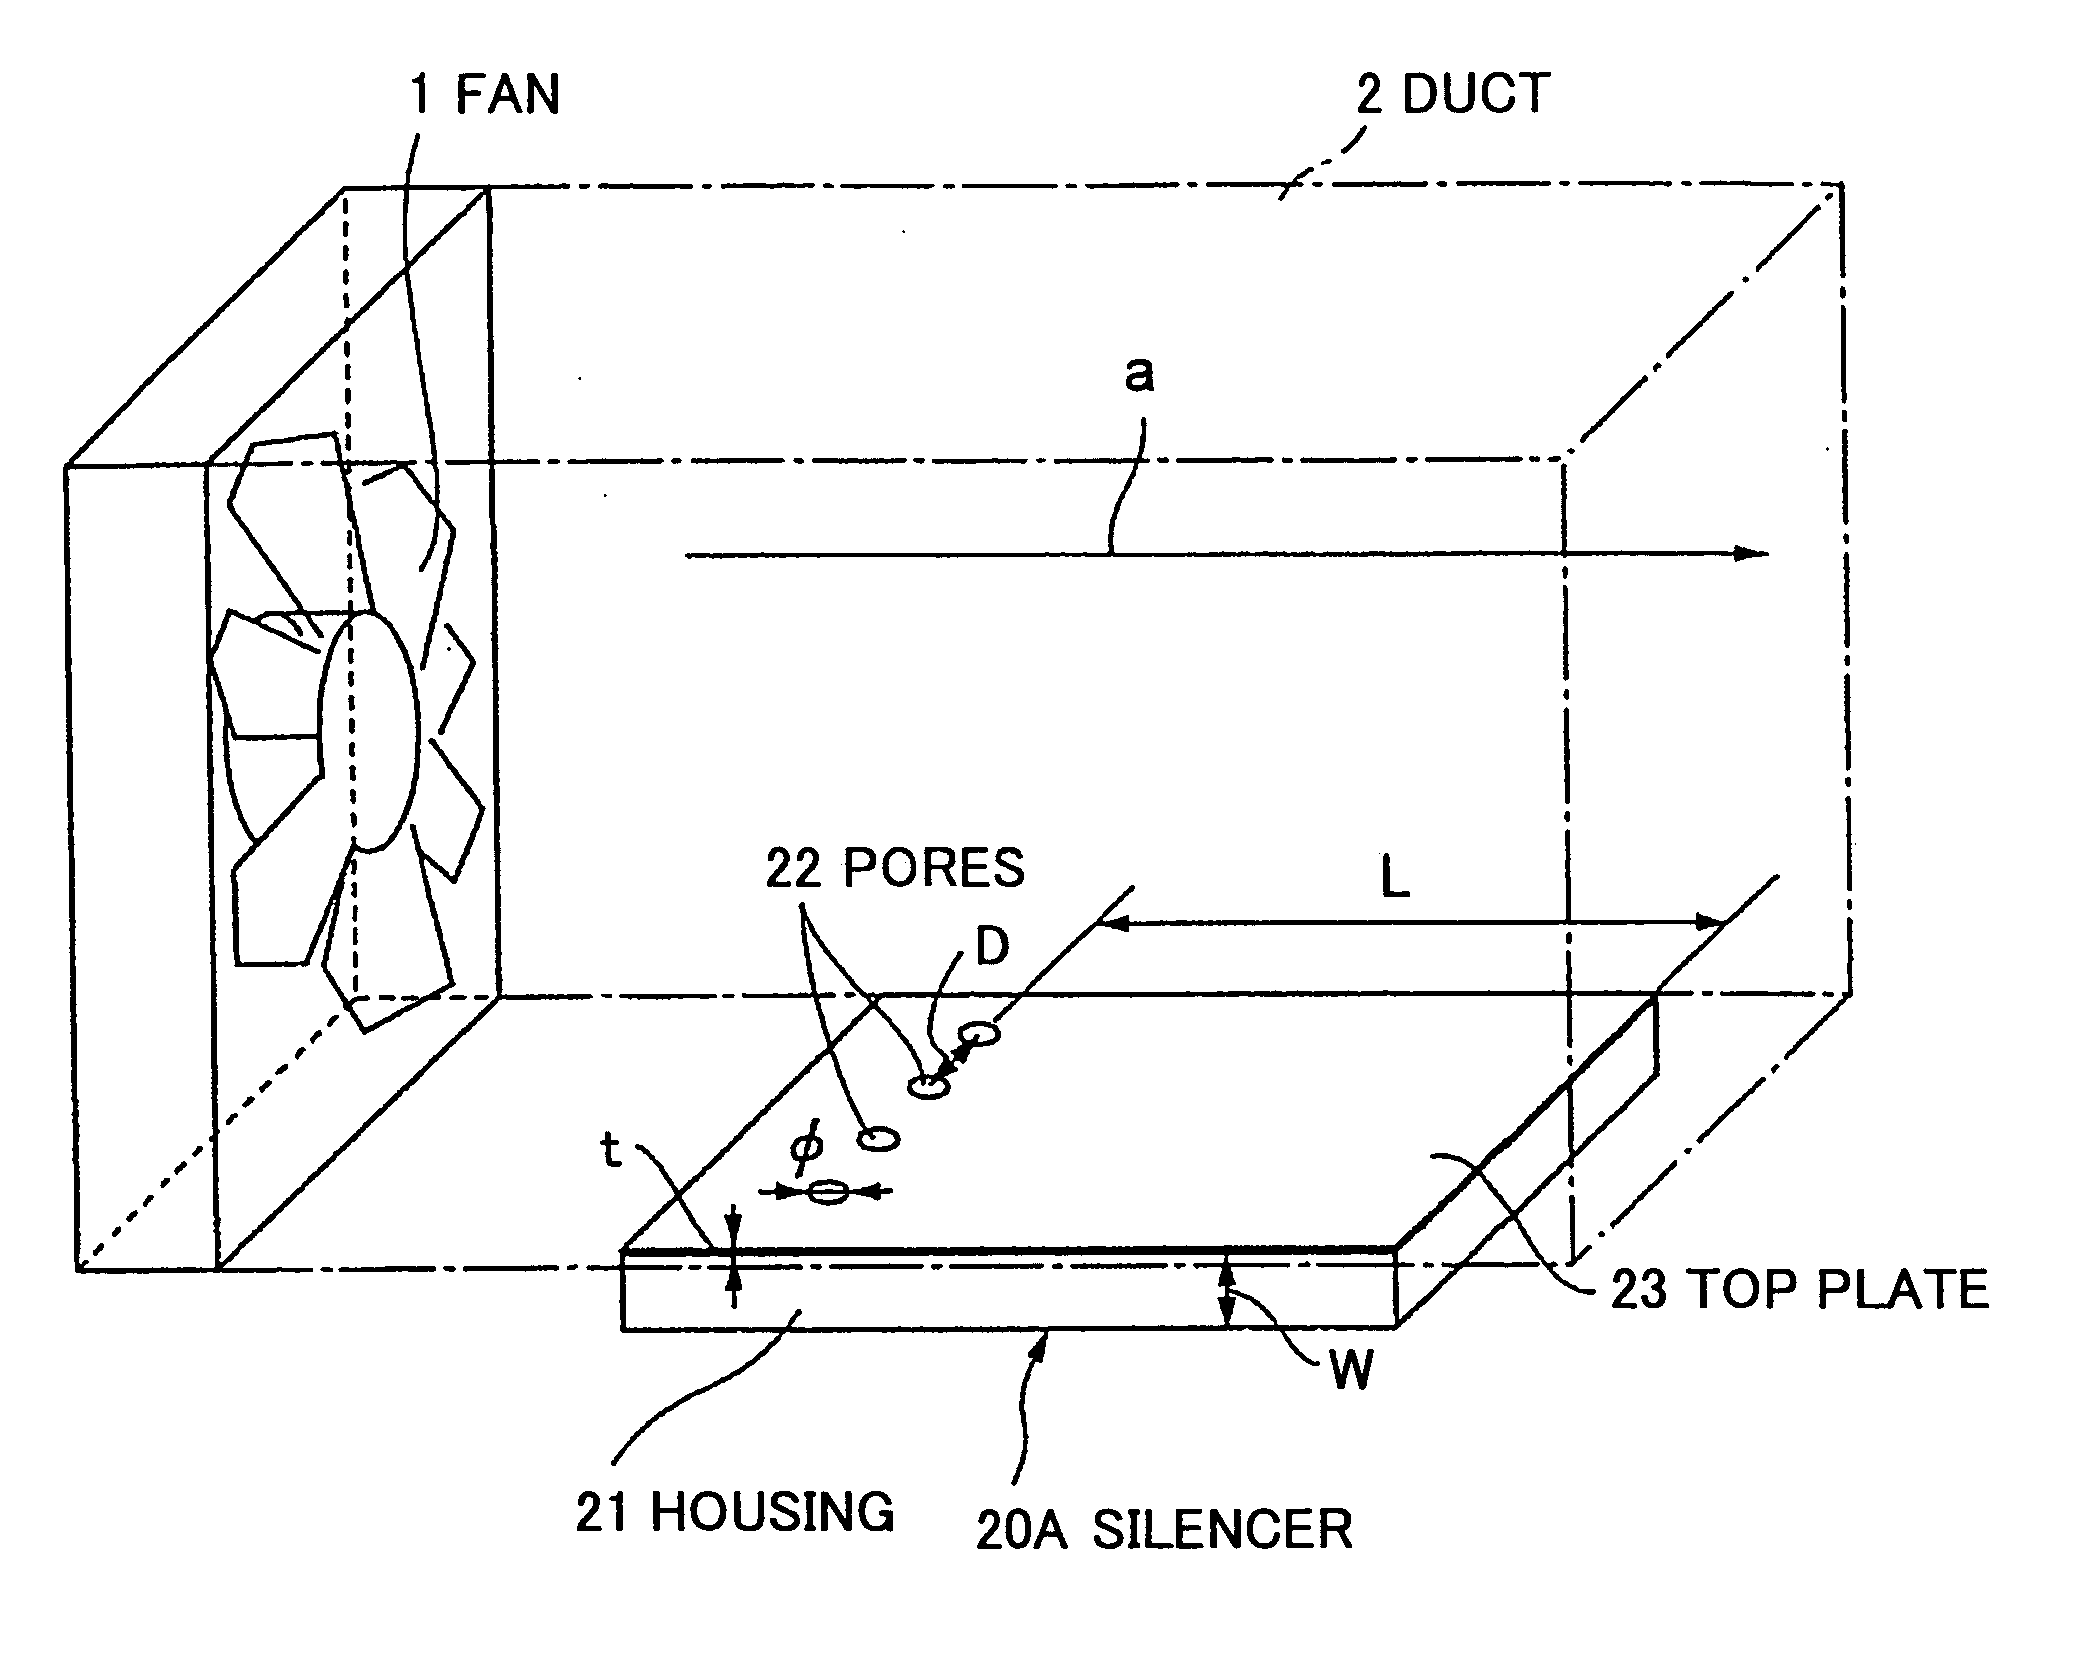 Silencer and electronic equipment